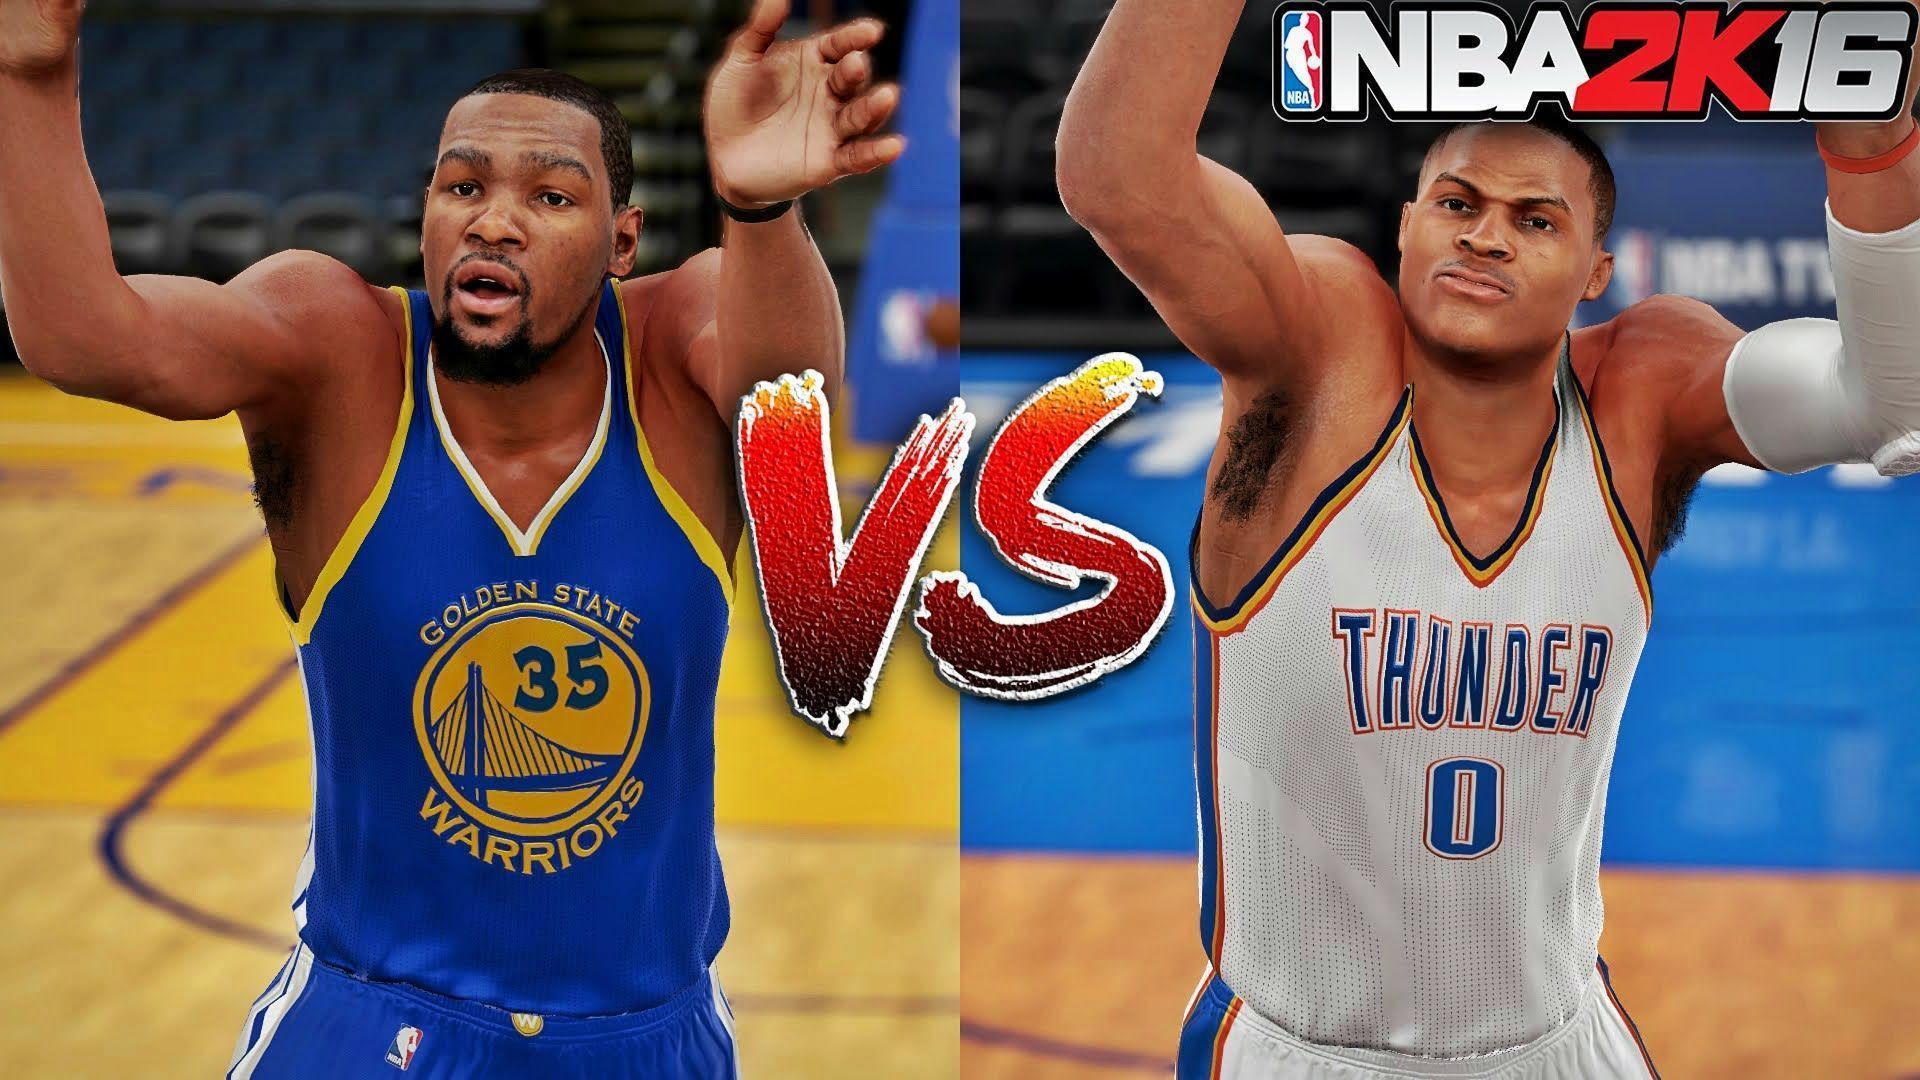 Kevin Durant vs Russell Westbrook - [Half Court Challenge]